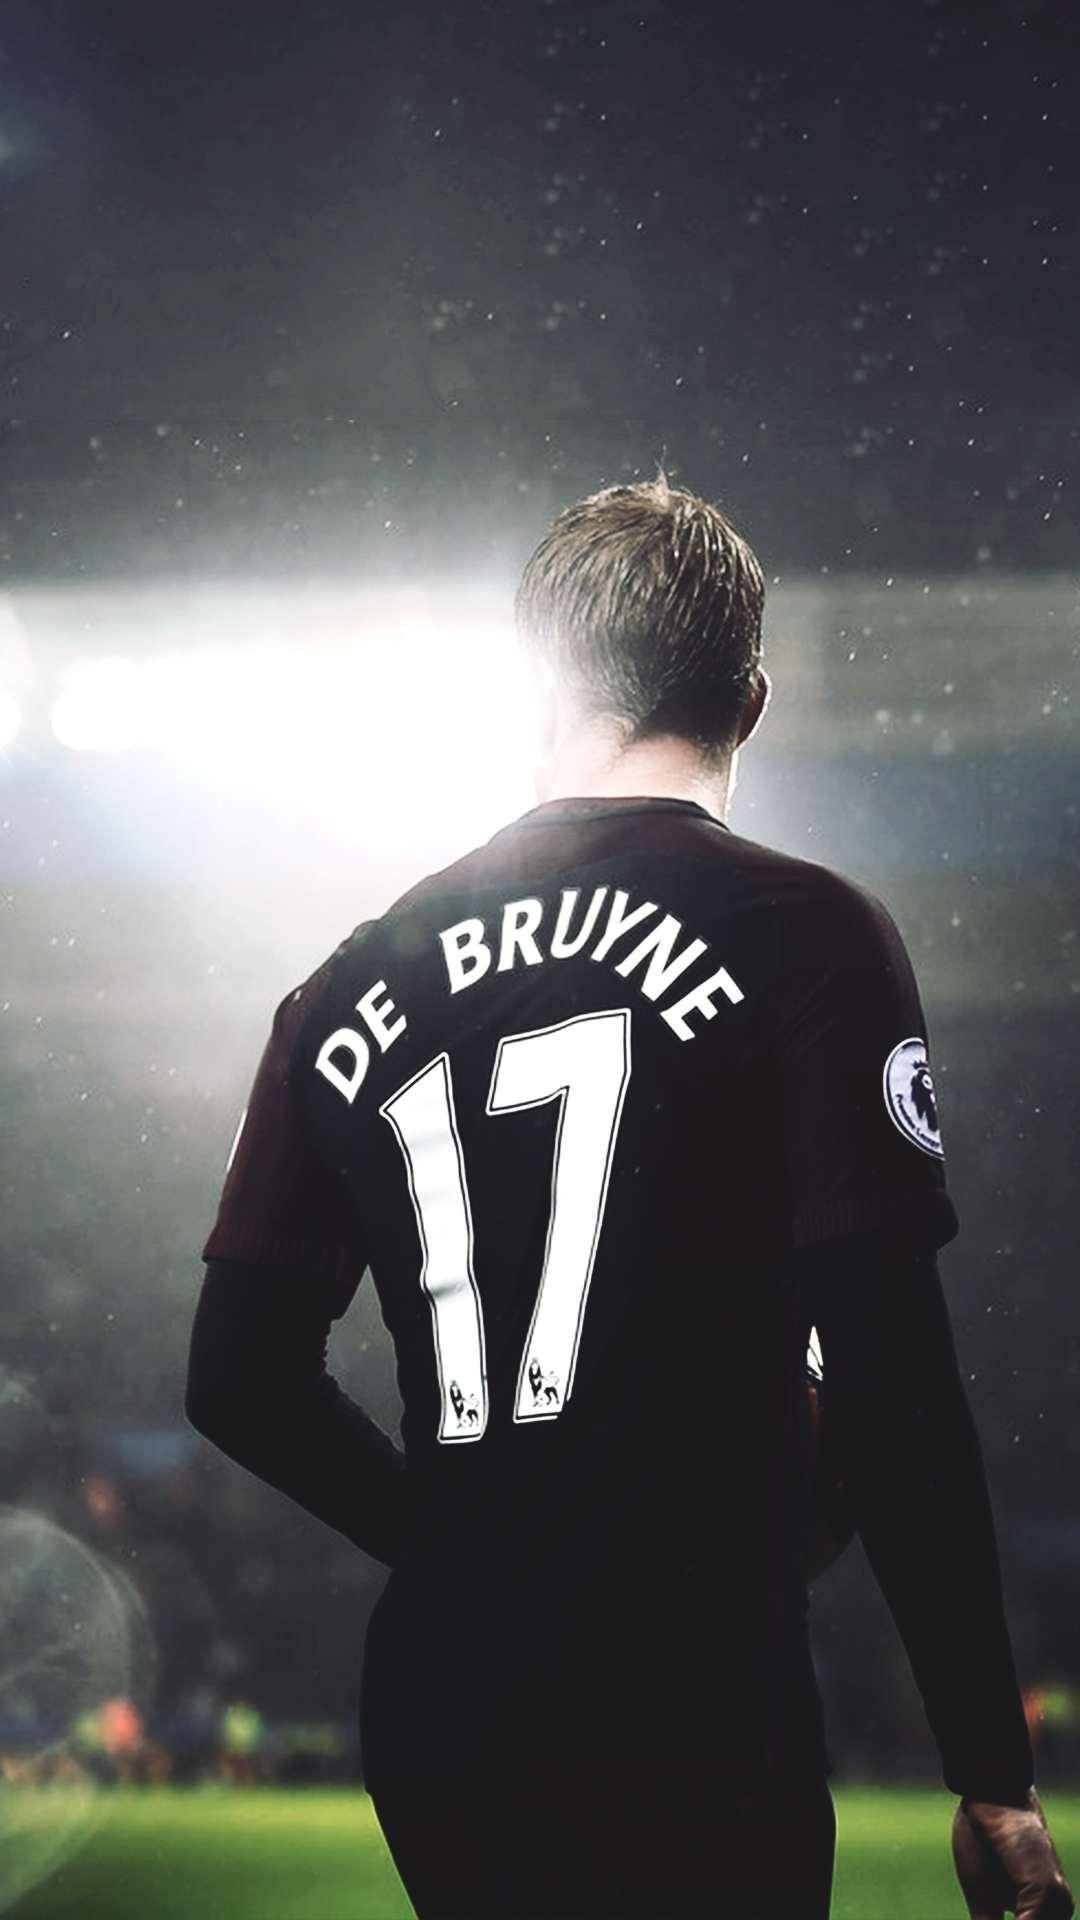 Kevin De Bruyne wallpapers, Android APK download, Manchester City logo, Manchester City football club, 1080x1920 Full HD Phone